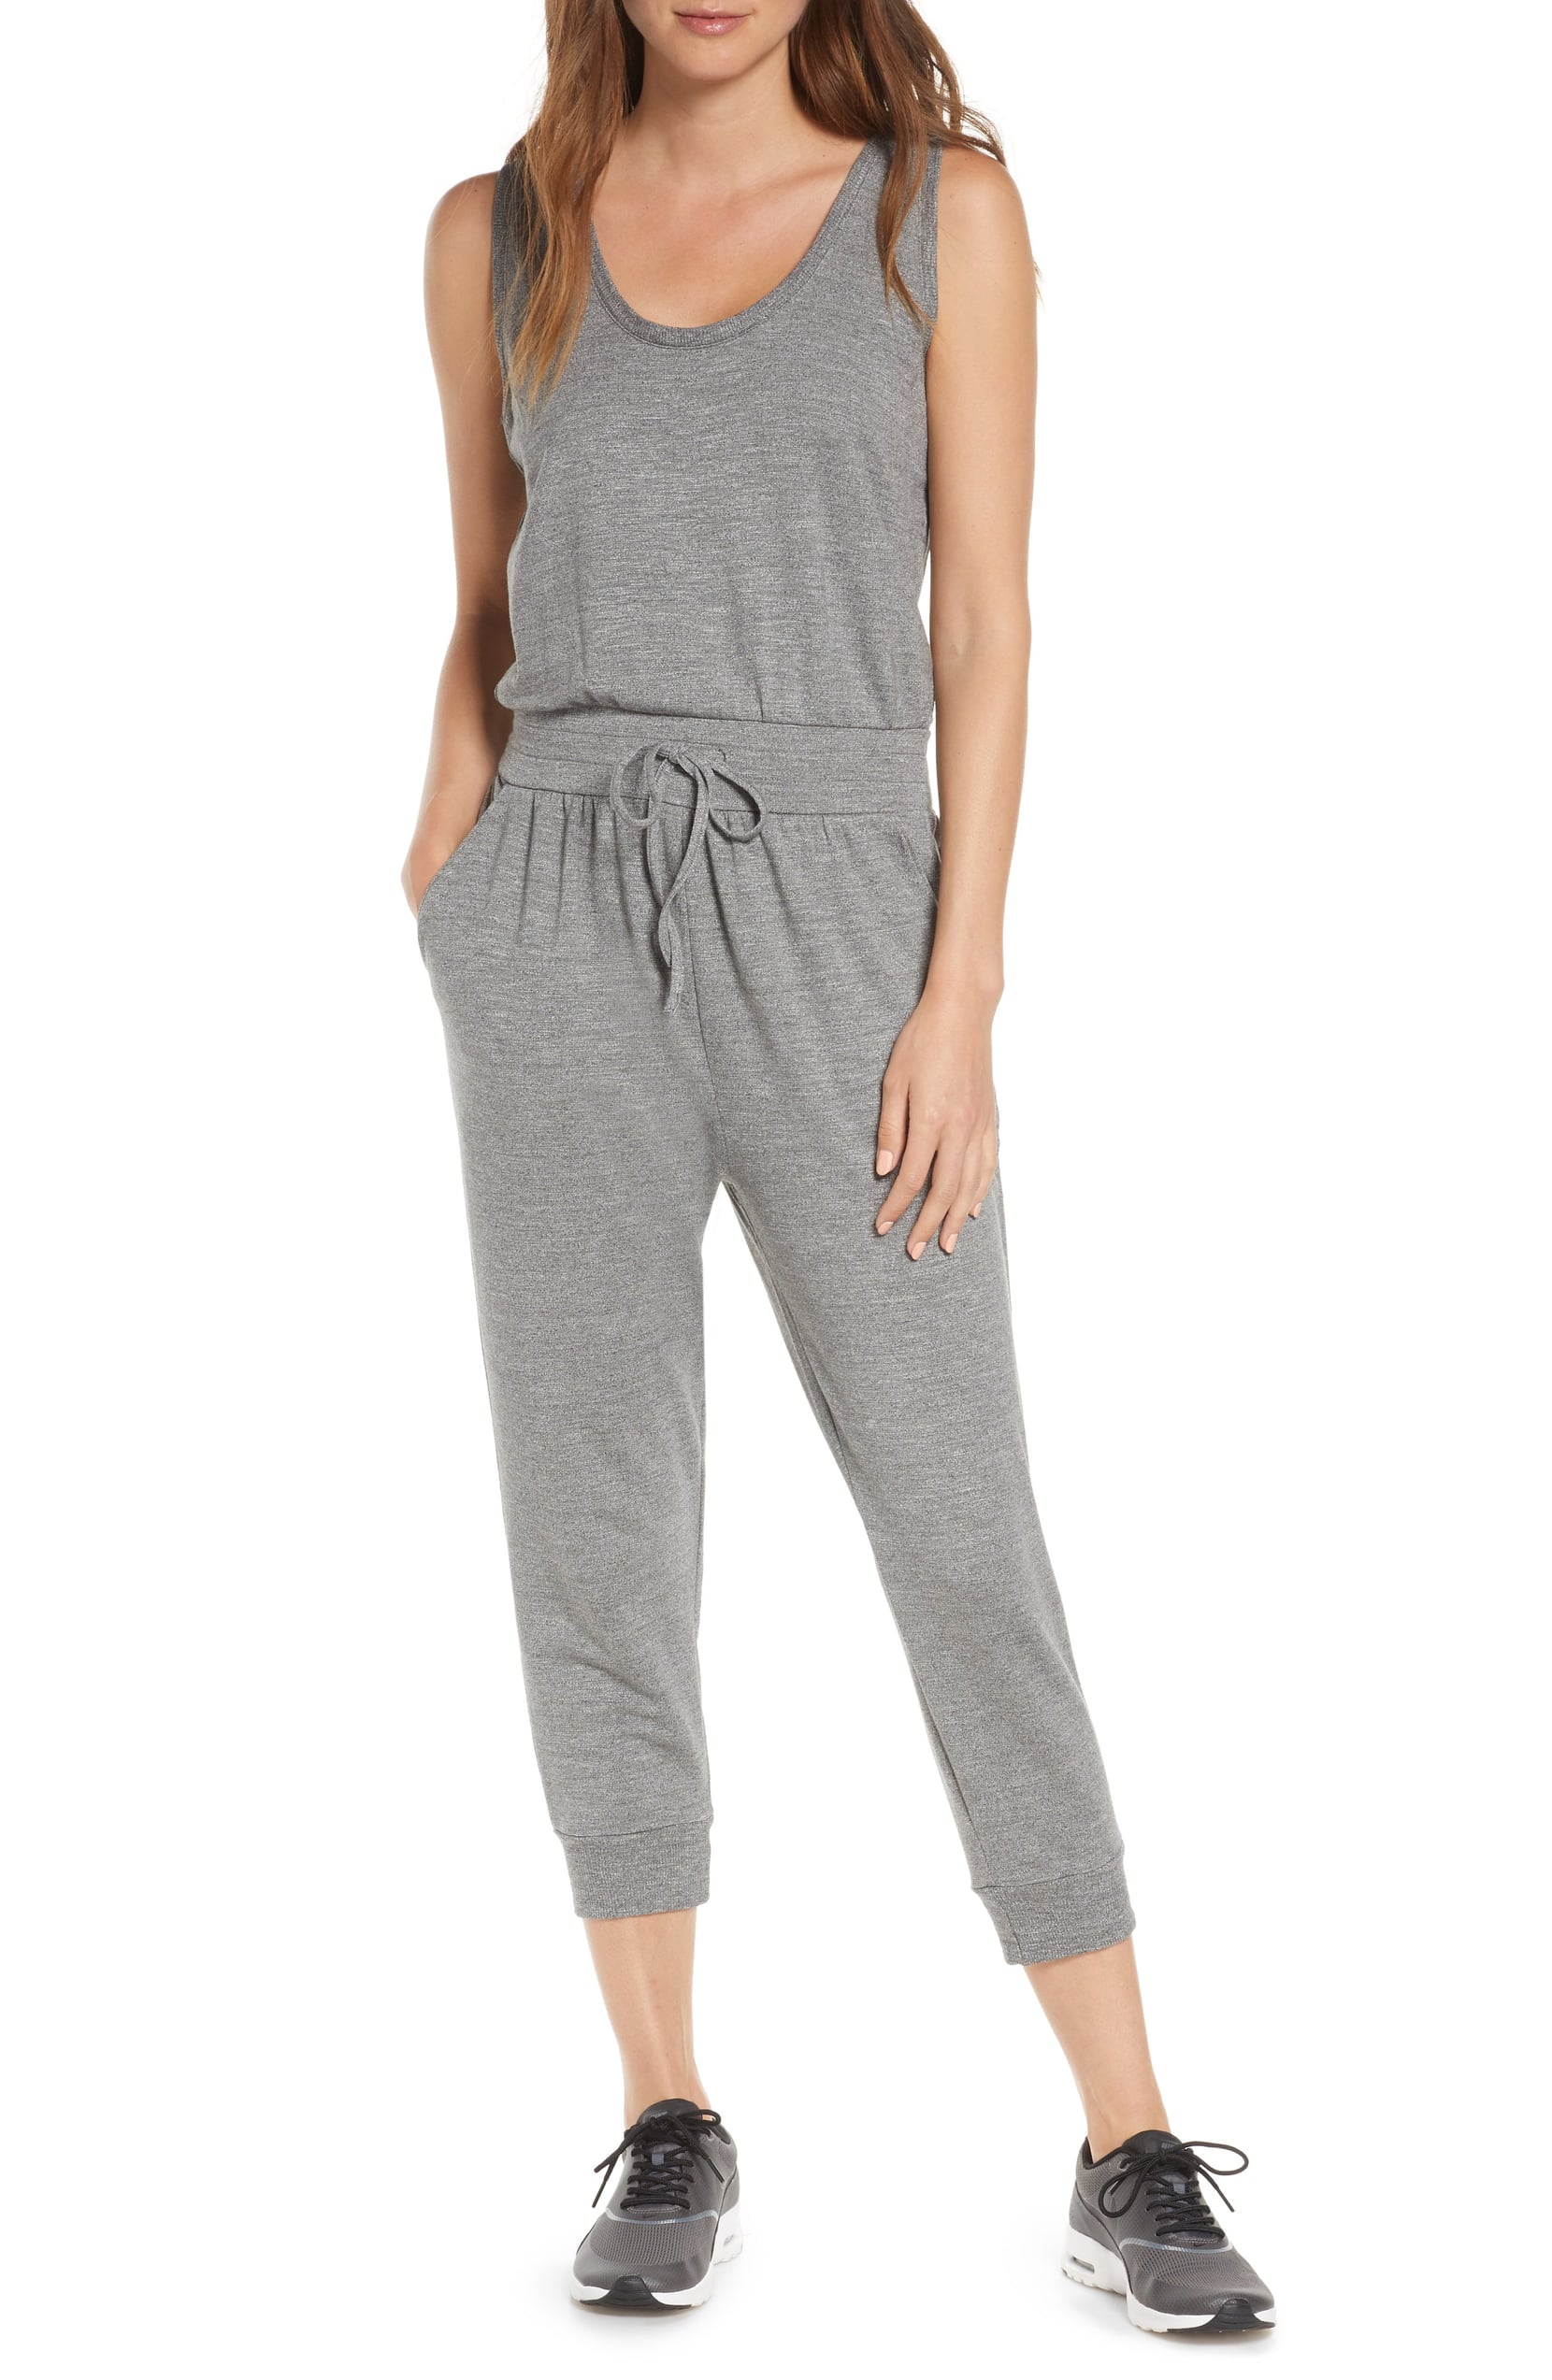 s Best-Selling $37 Jumpsuit Is So Comfy and Cute